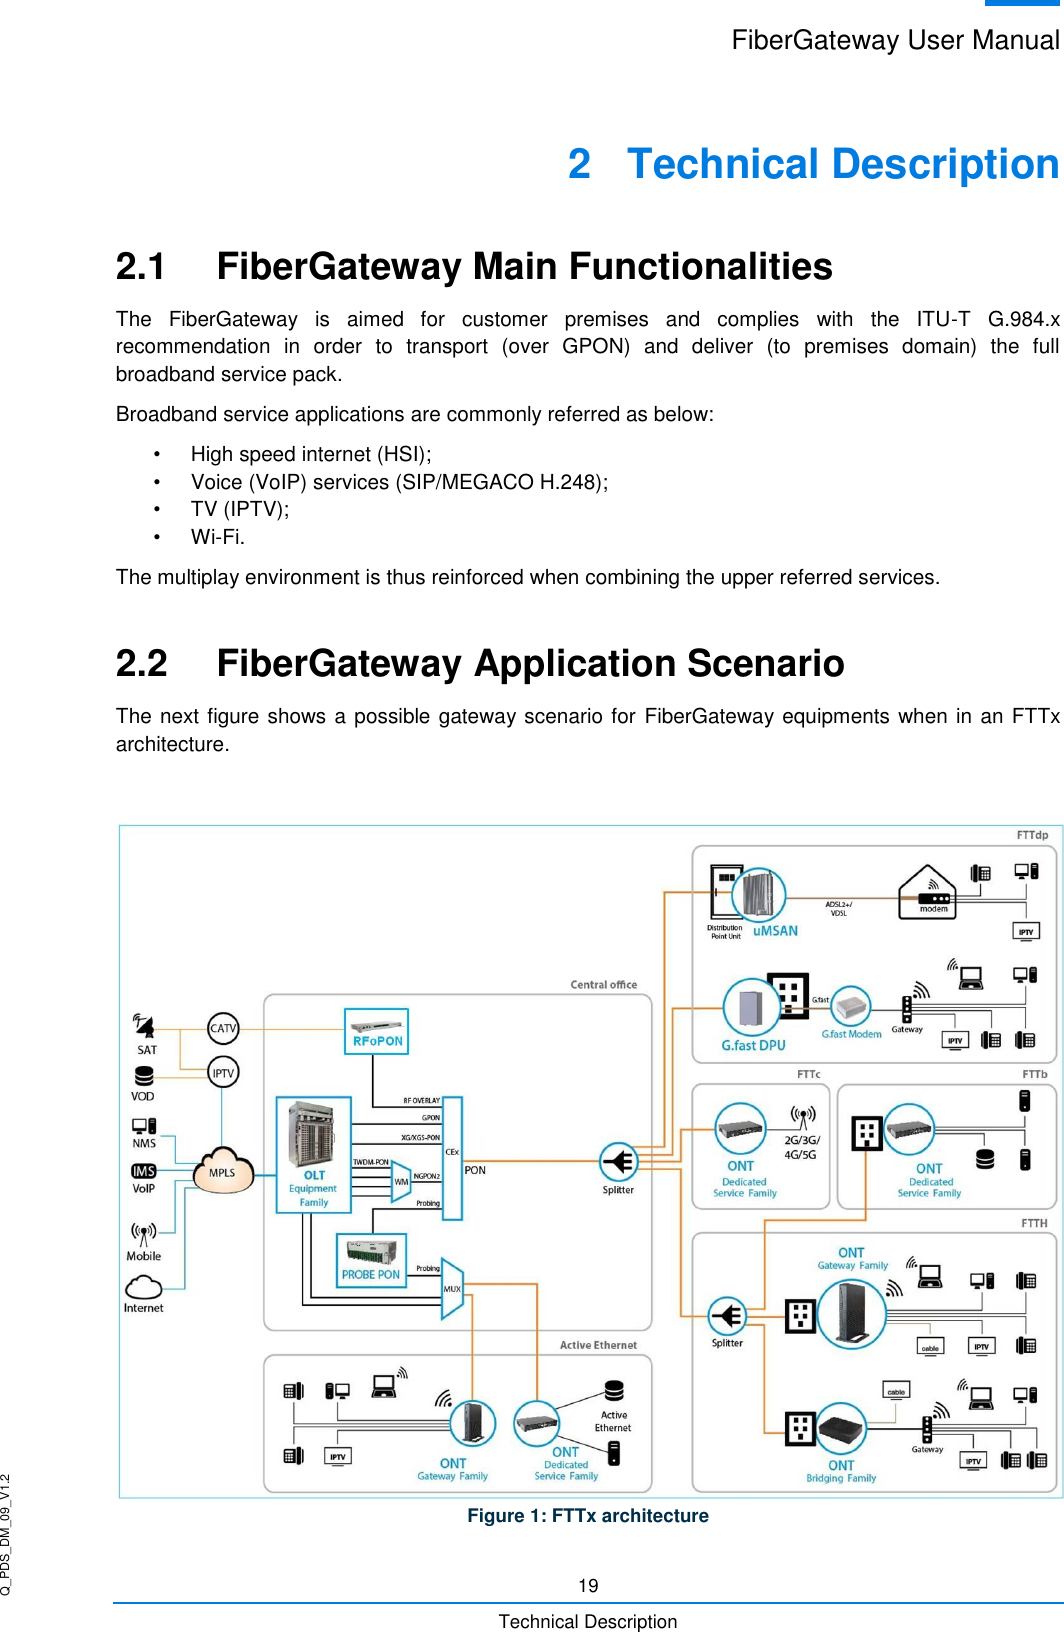 Q_PDS_DM_09_V1.2 FiberGateway User Manual  19 Technical Description 2  Technical Description 2.1  FiberGateway Main Functionalities The  FiberGateway  is  aimed  for  customer  premises  and  complies  with  the  ITU-T  G.984.x recommendation  in  order  to  transport  (over  GPON)  and  deliver  (to  premises  domain)  the  full broadband service pack. Broadband service applications are commonly referred as below: •  High speed internet (HSI);  •  Voice (VoIP) services (SIP/MEGACO H.248); •  TV (IPTV); • Wi-Fi. The multiplay environment is thus reinforced when combining the upper referred services. 2.2  FiberGateway Application Scenario The next figure shows a possible gateway scenario for  FiberGateway equipments when in an FTTx architecture.   Figure 1: FTTx architecture 